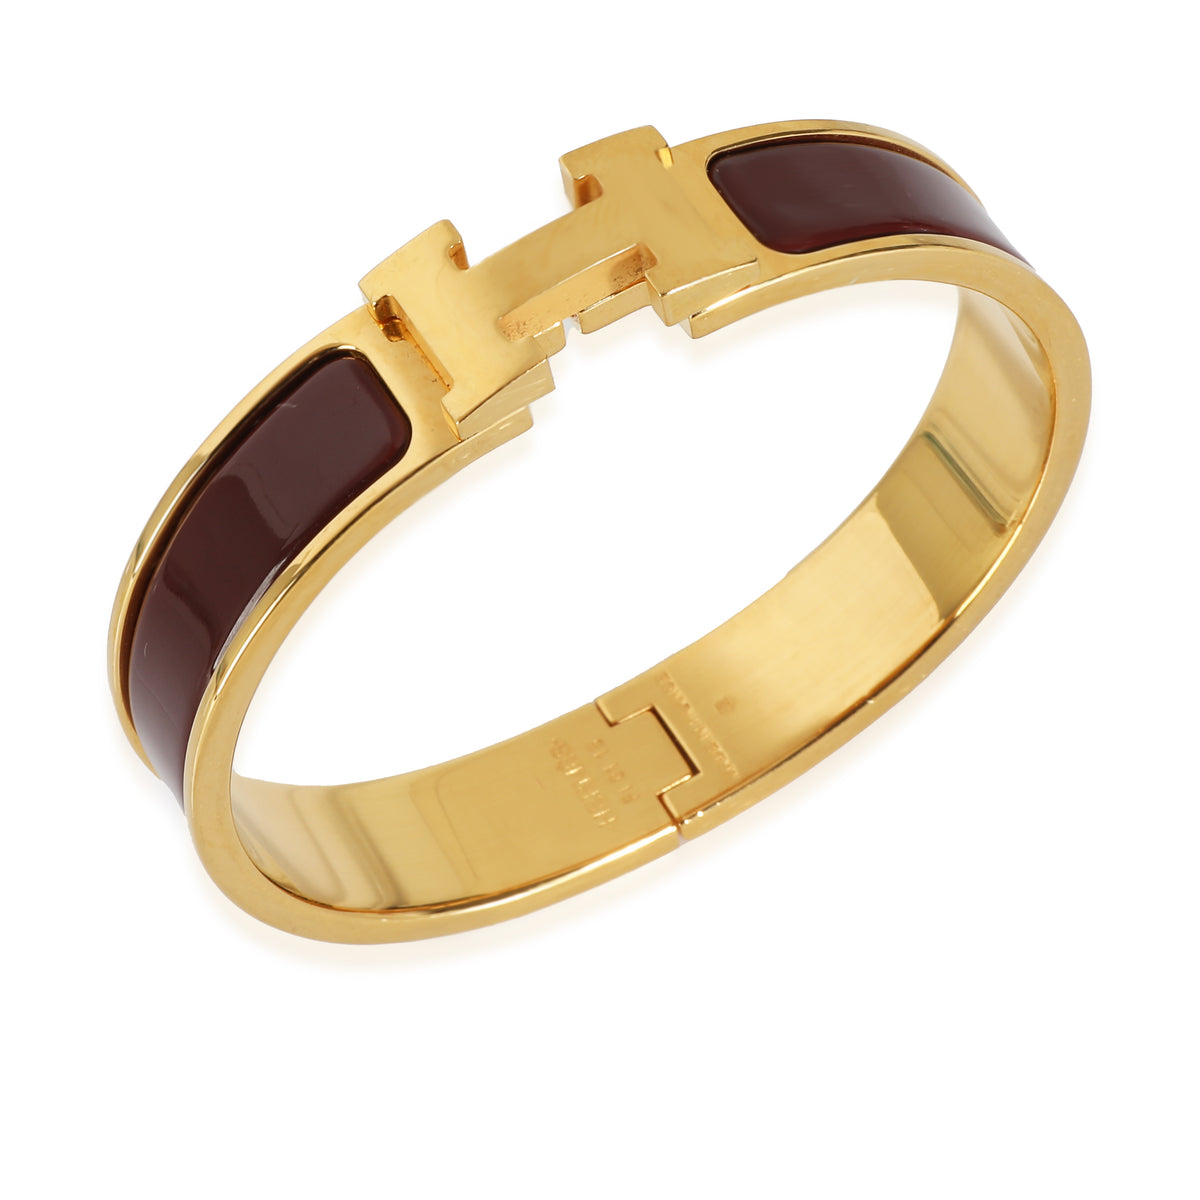 Clic H Bracelet in  Gold Plated